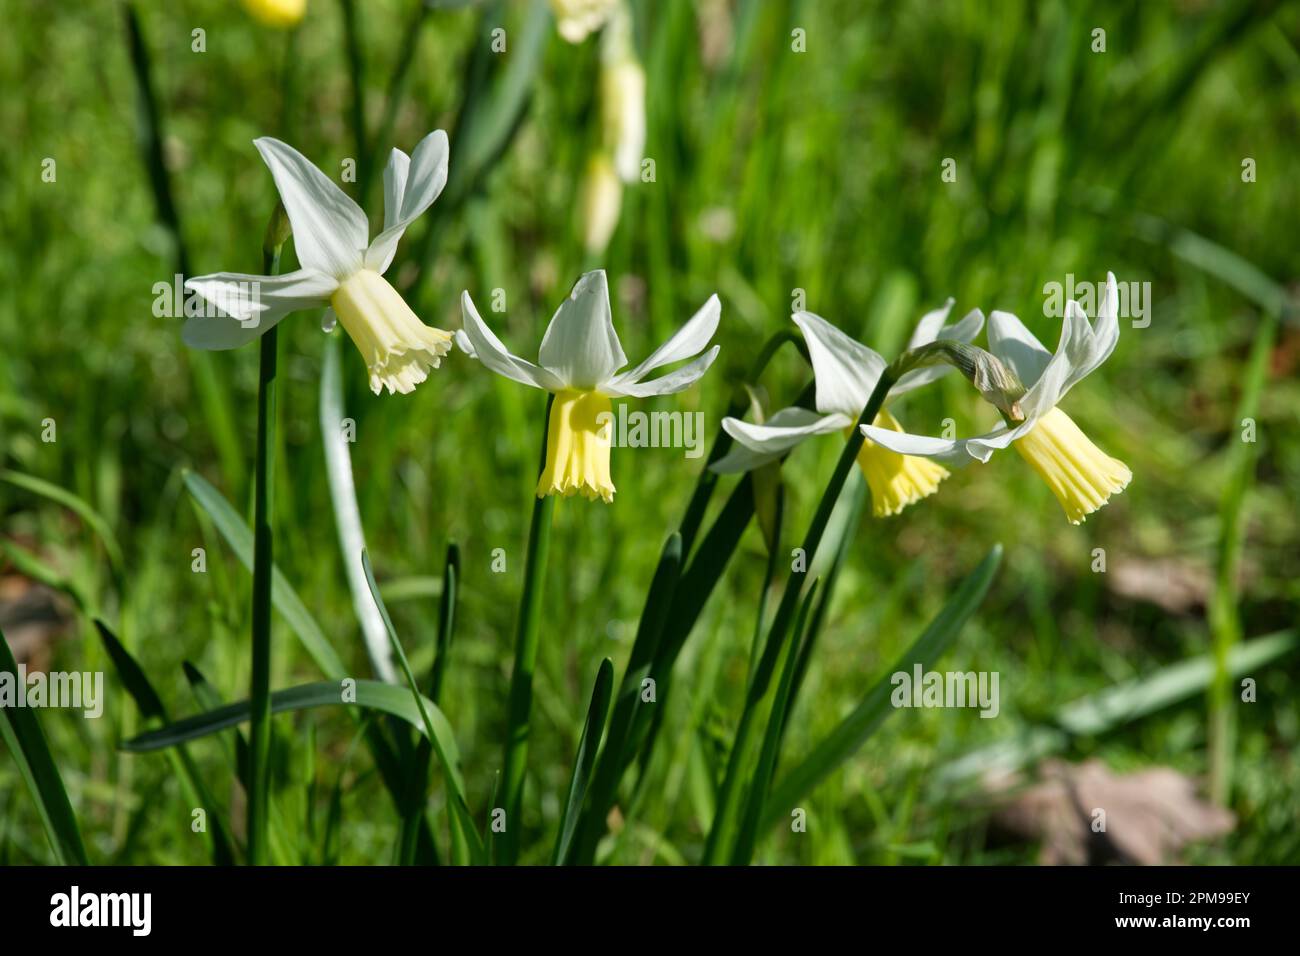 White and pale Yellow spring flowers of dwarf daffodil narcissus Jenny in UK garden April Stock Photo